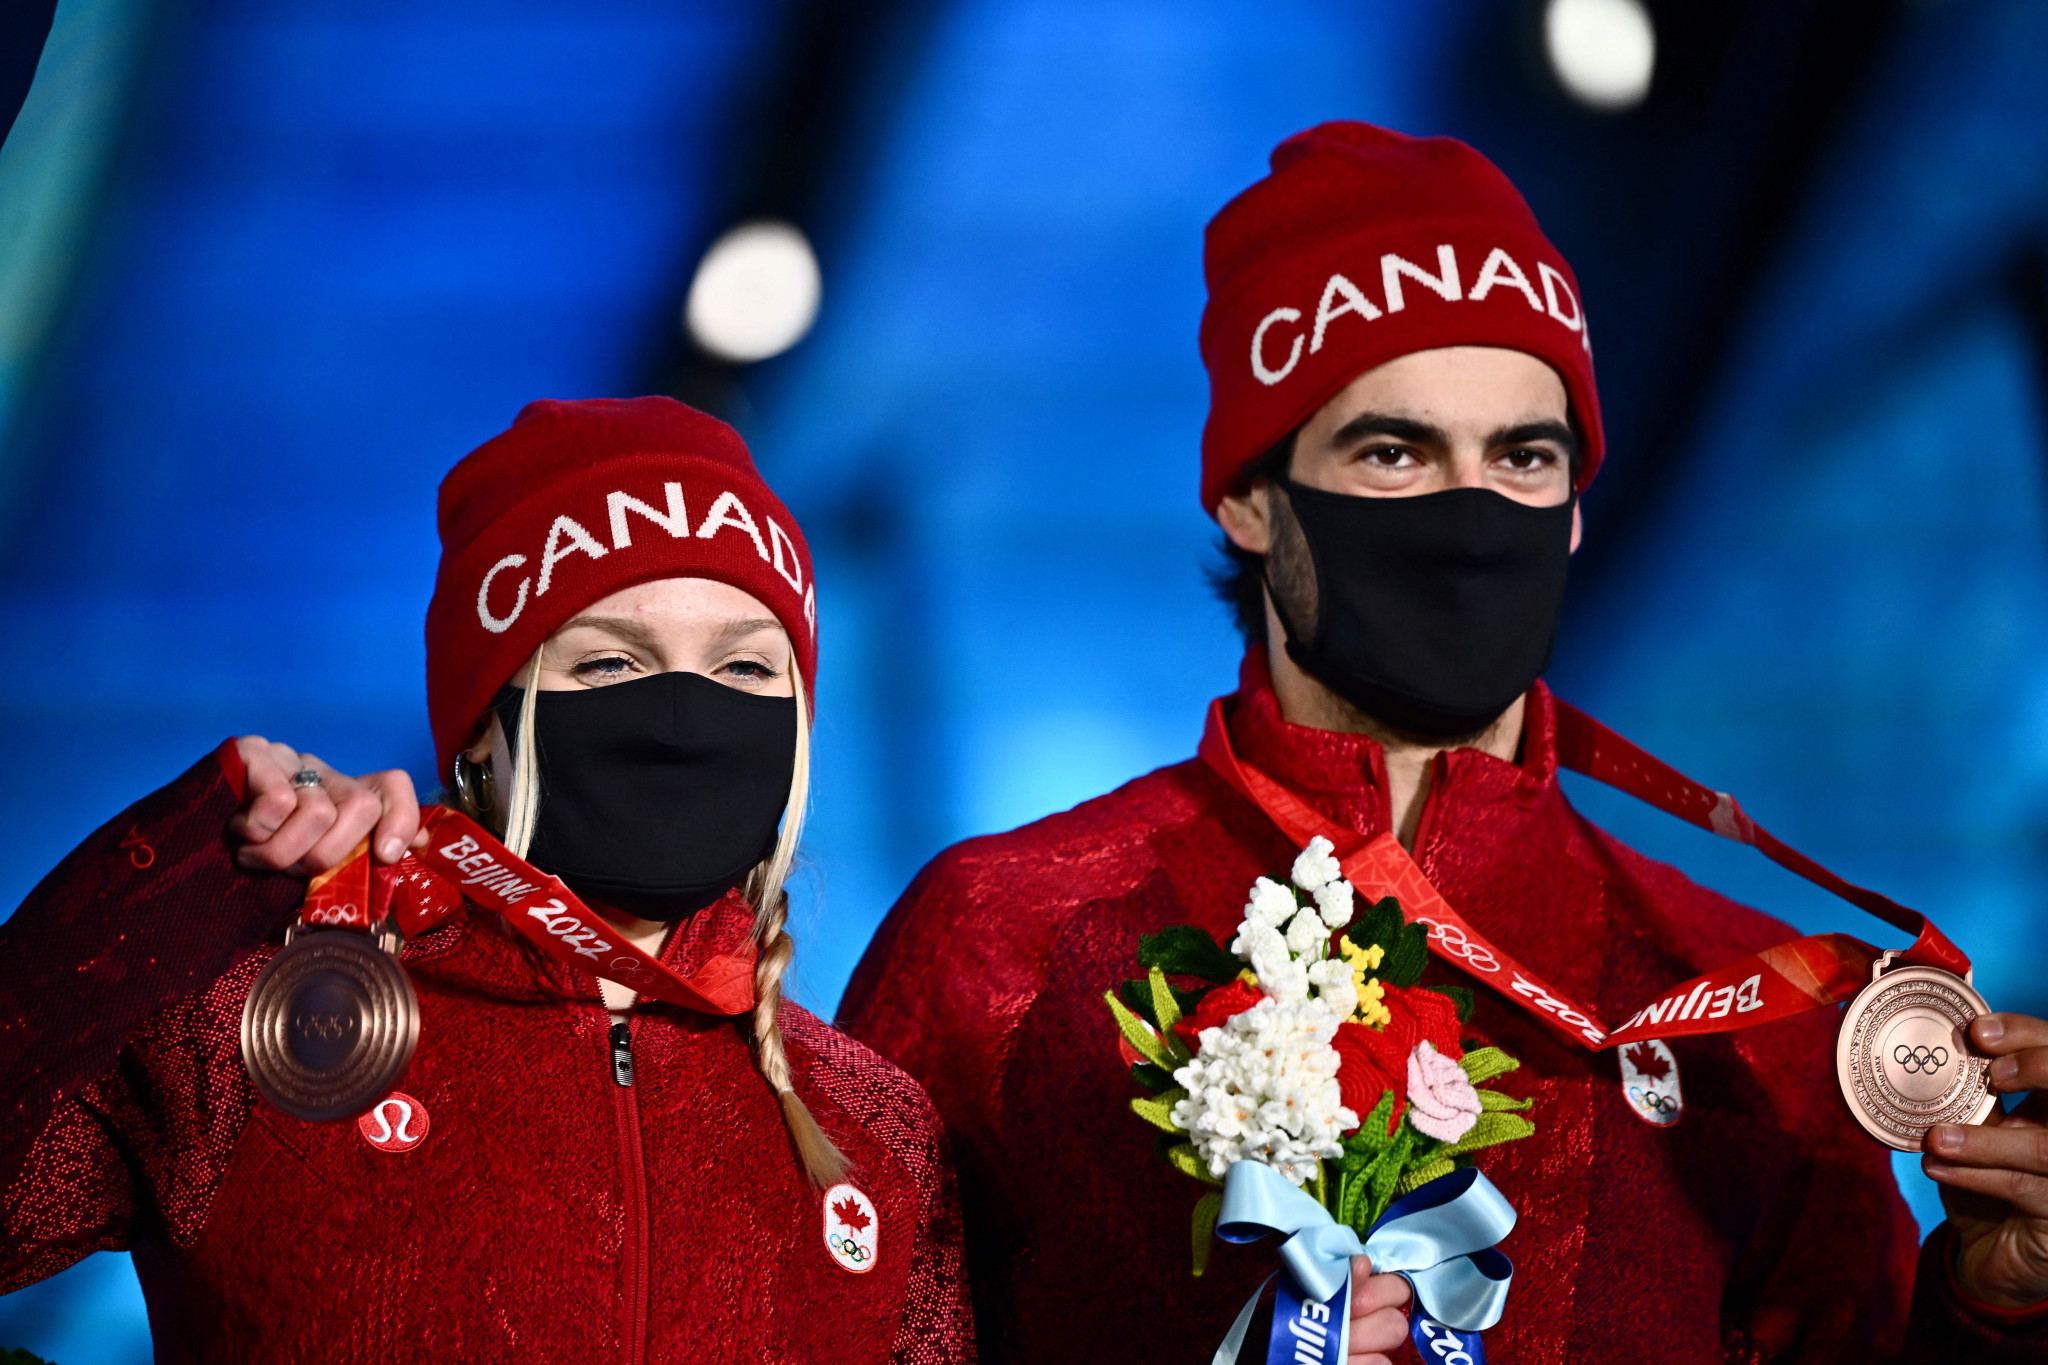 Canadian athletes will have the chance to land more money for podium finishes in an added incentive. GETTY IMAGES